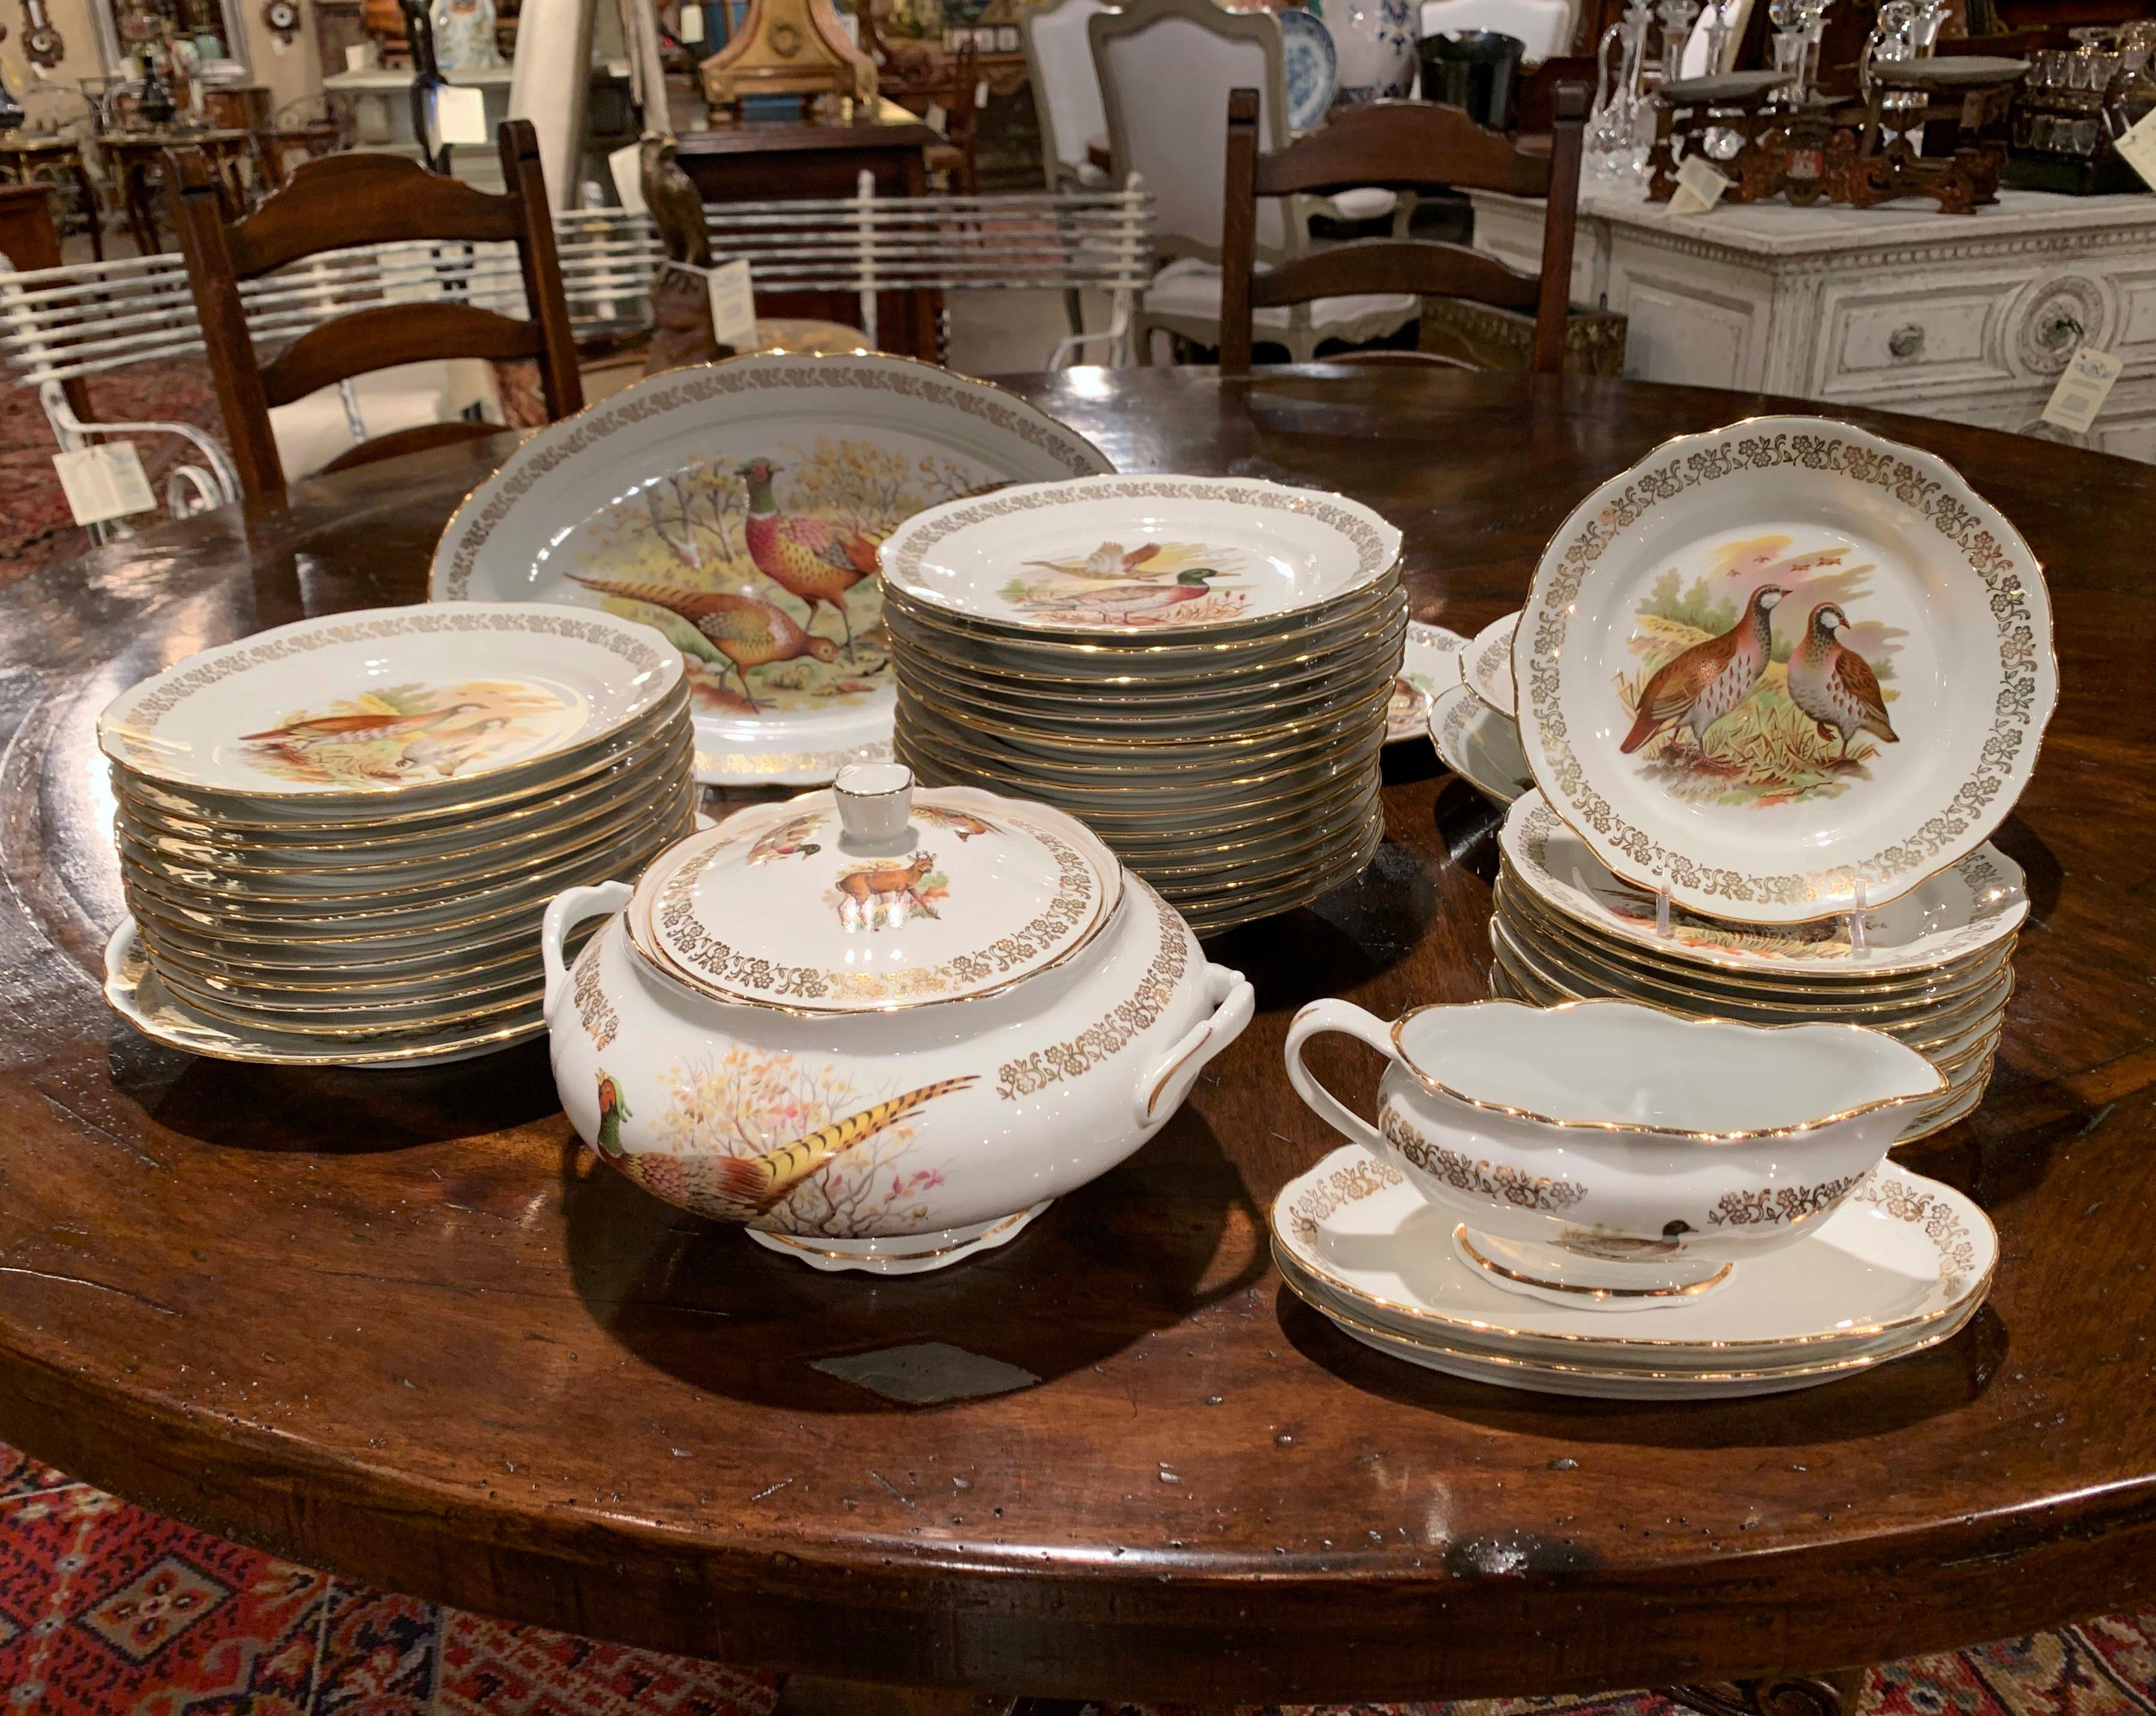 Decorate a dining room table with this exquisite porcelain service set of 46 pieces ; crafted in France circa 1960, the set features hand painted hunt motifs with gilt trim. The motifs include rabbit, deer, grouse, duck, boar, and much more. Each